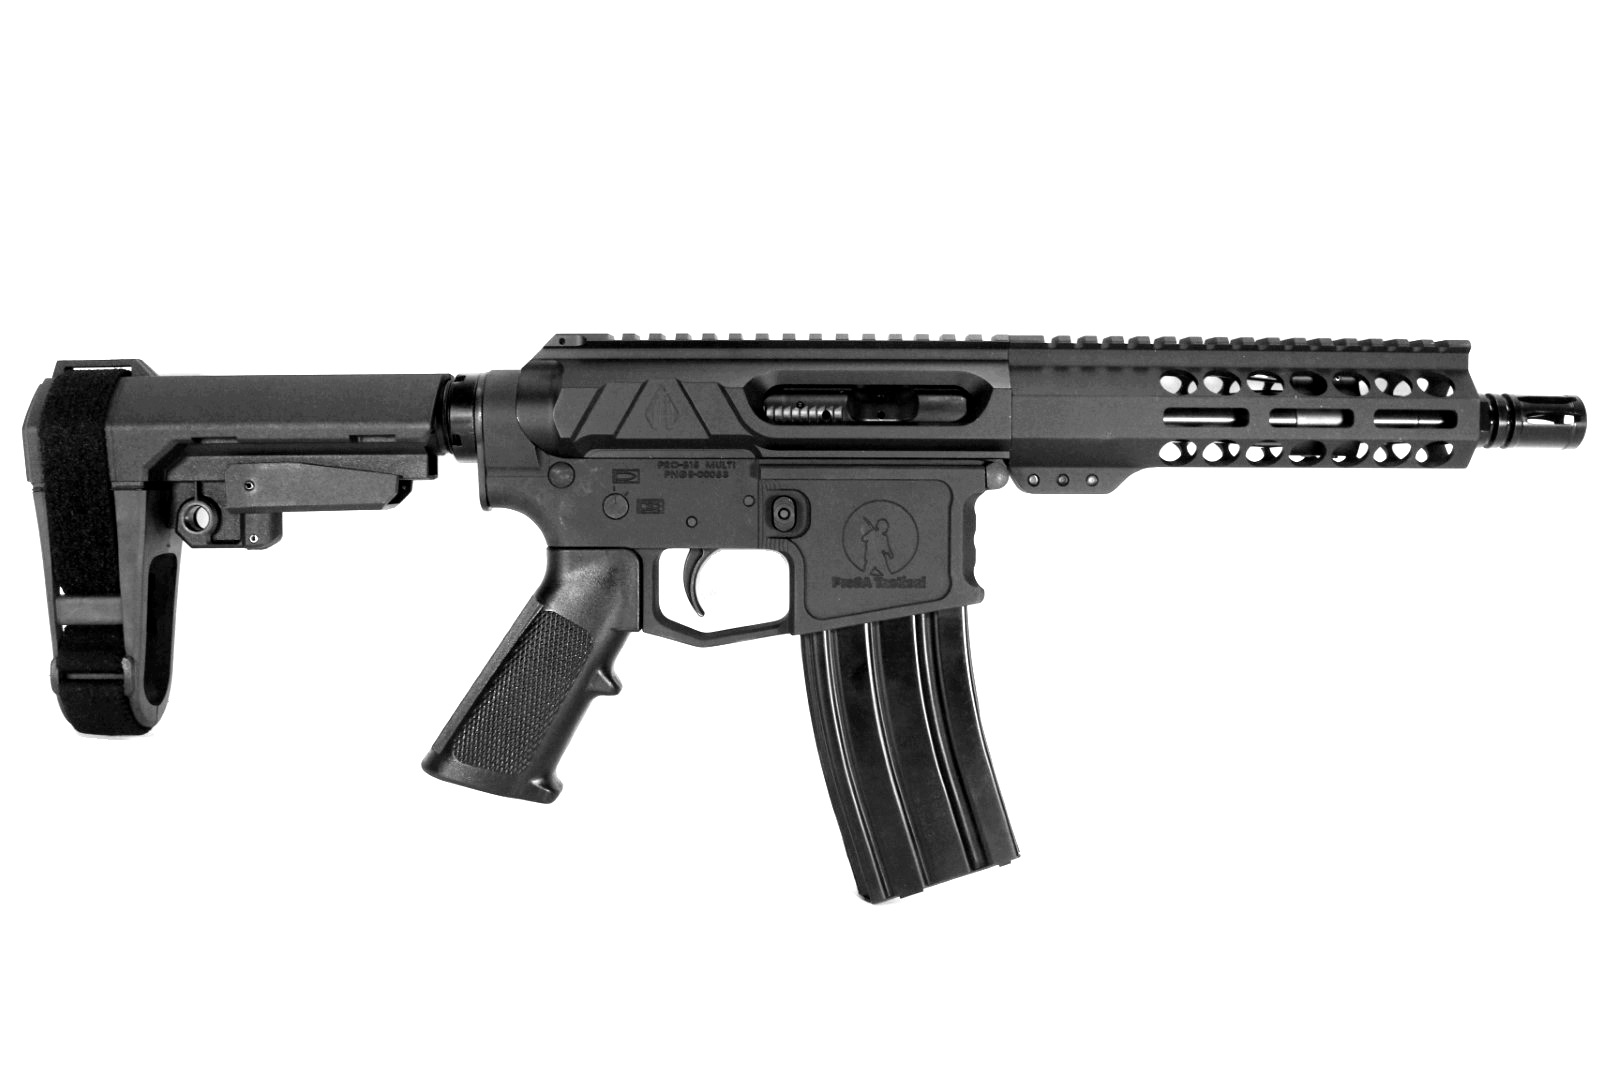 7.5 inch 300 Blackout AR Side Charging Pistol | Pro2A Tactical | USA MADE